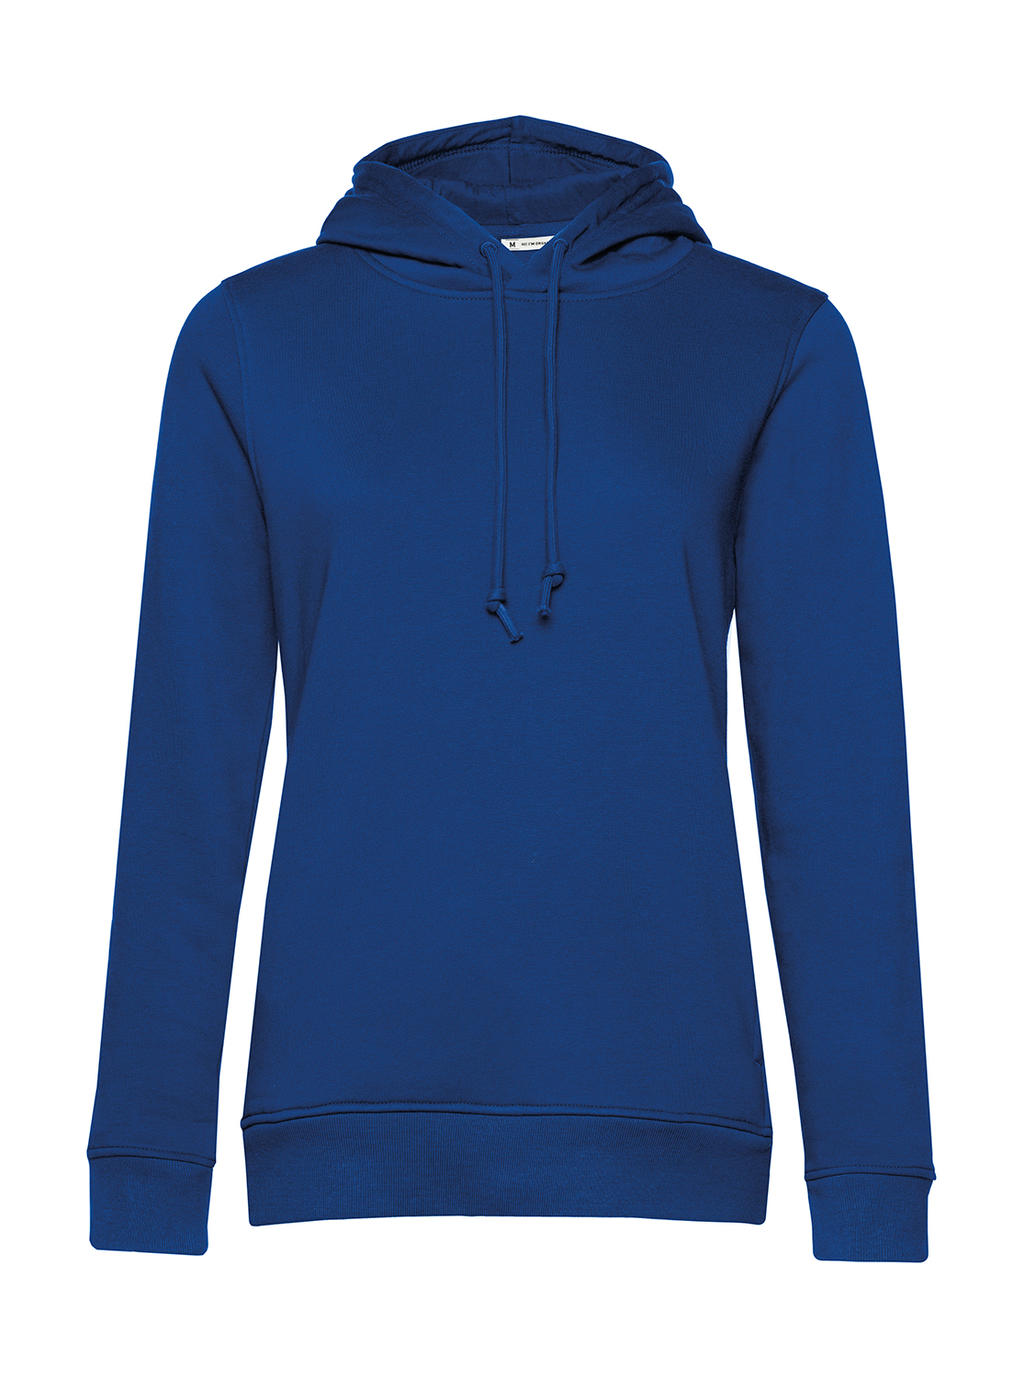  Organic Inspire Hooded /women_? in Farbe Royal